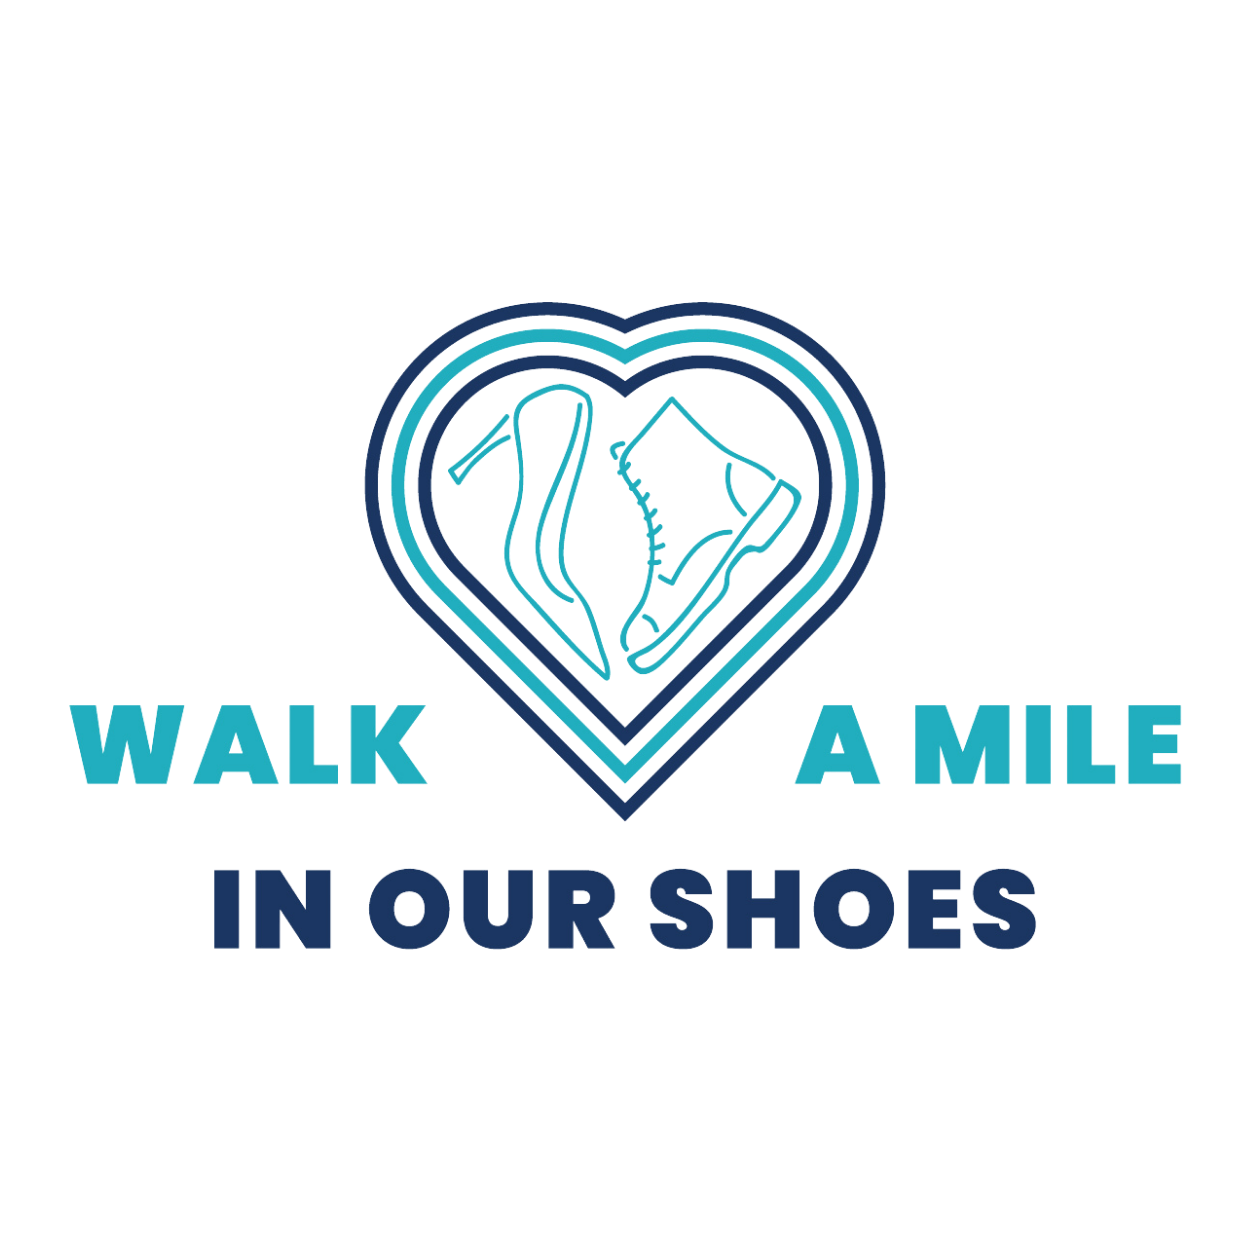 PATHWAYS TO HEALING – Annual Walk-A-Mile Fundraiser to be Held in Person Next Weekend to Benefit “Pathways to Healing”